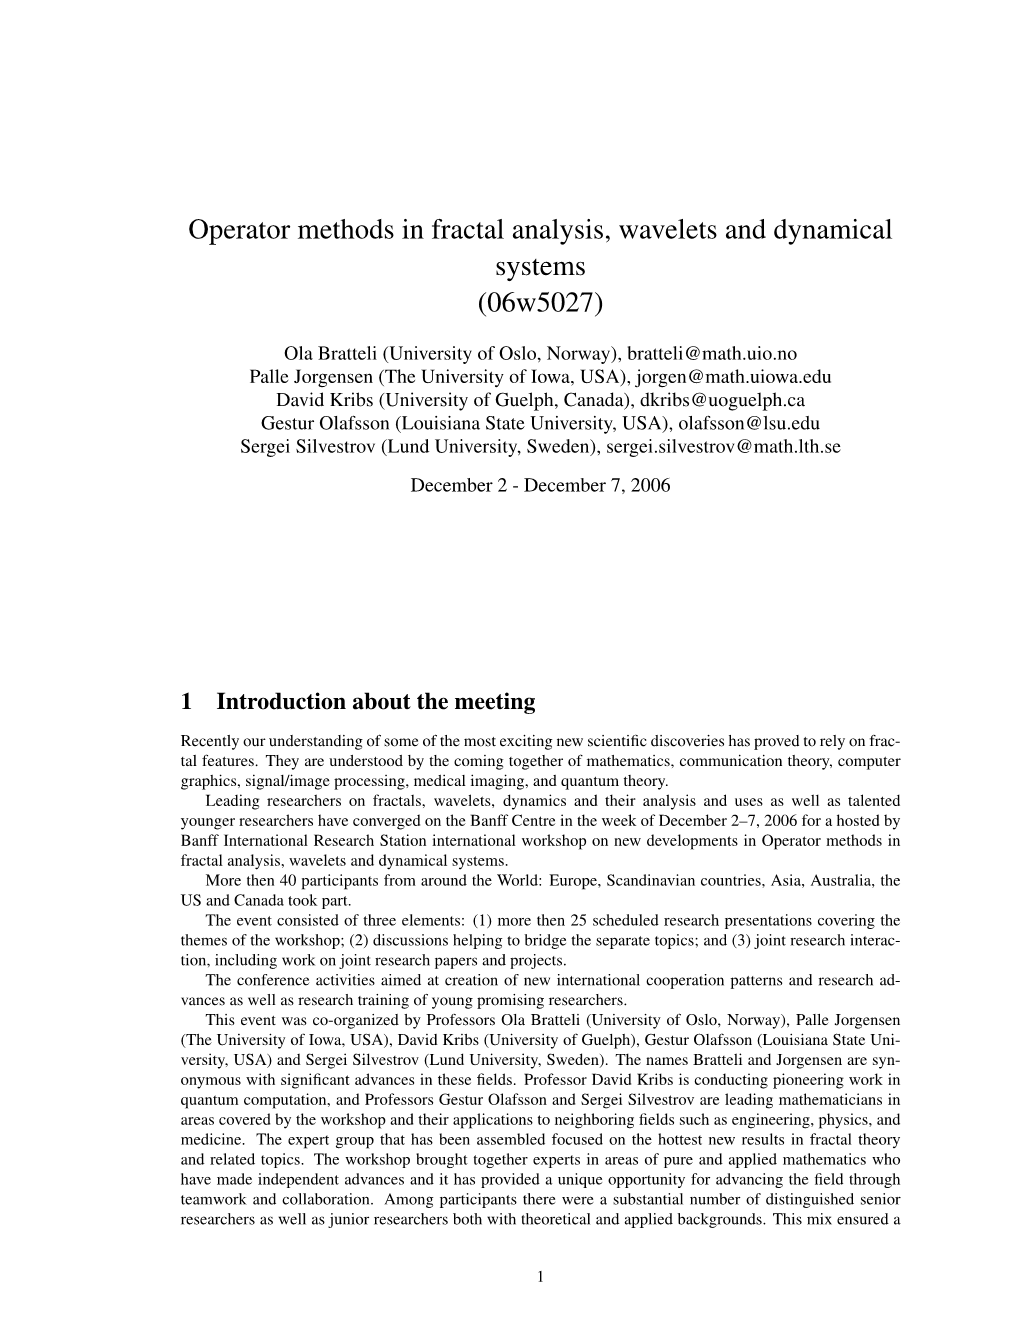 Operator Methods in Fractal Analysis, Wavelets and Dynamical Systems (06W5027)